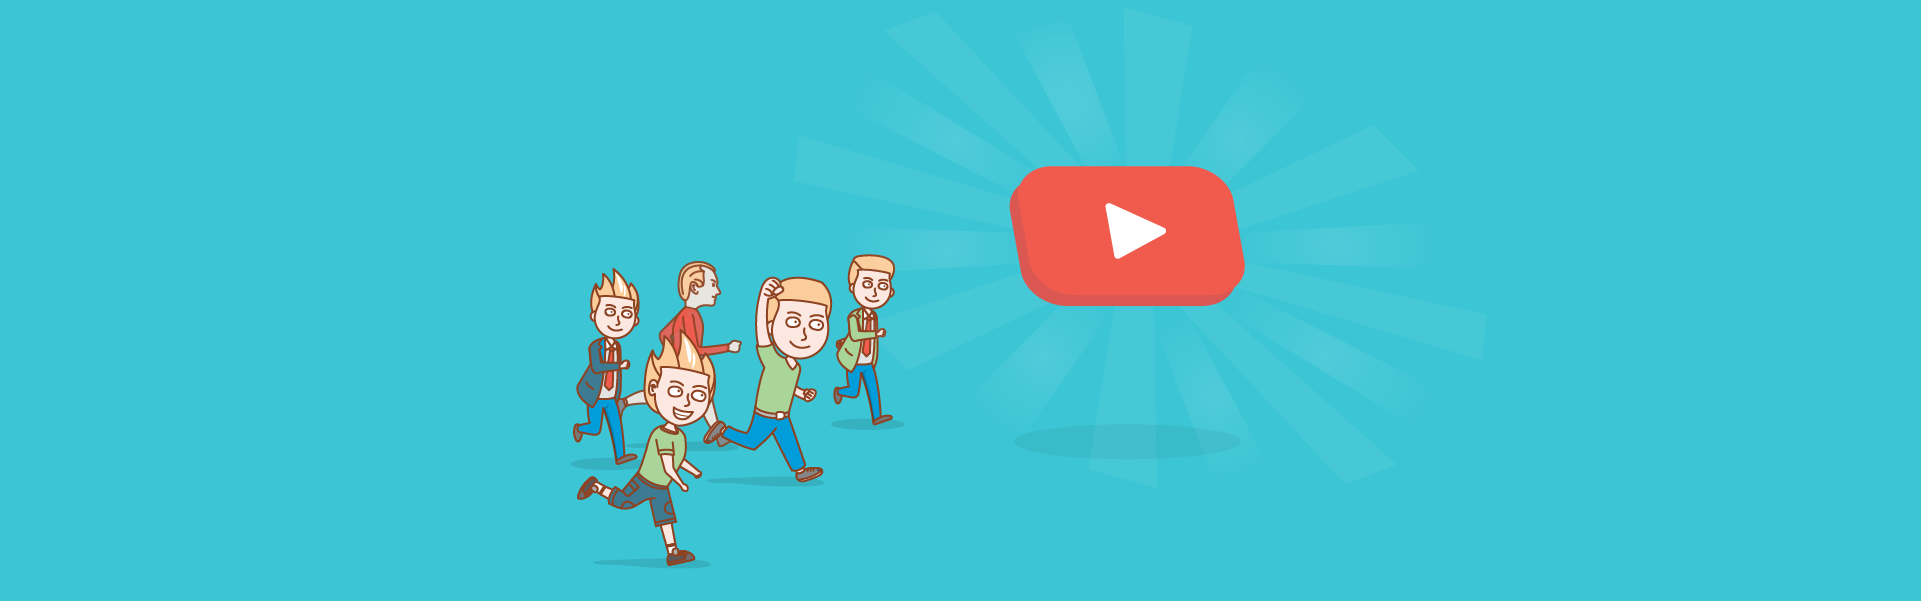 6 YouTube Lead Generation Tips to Help Your Business Grow